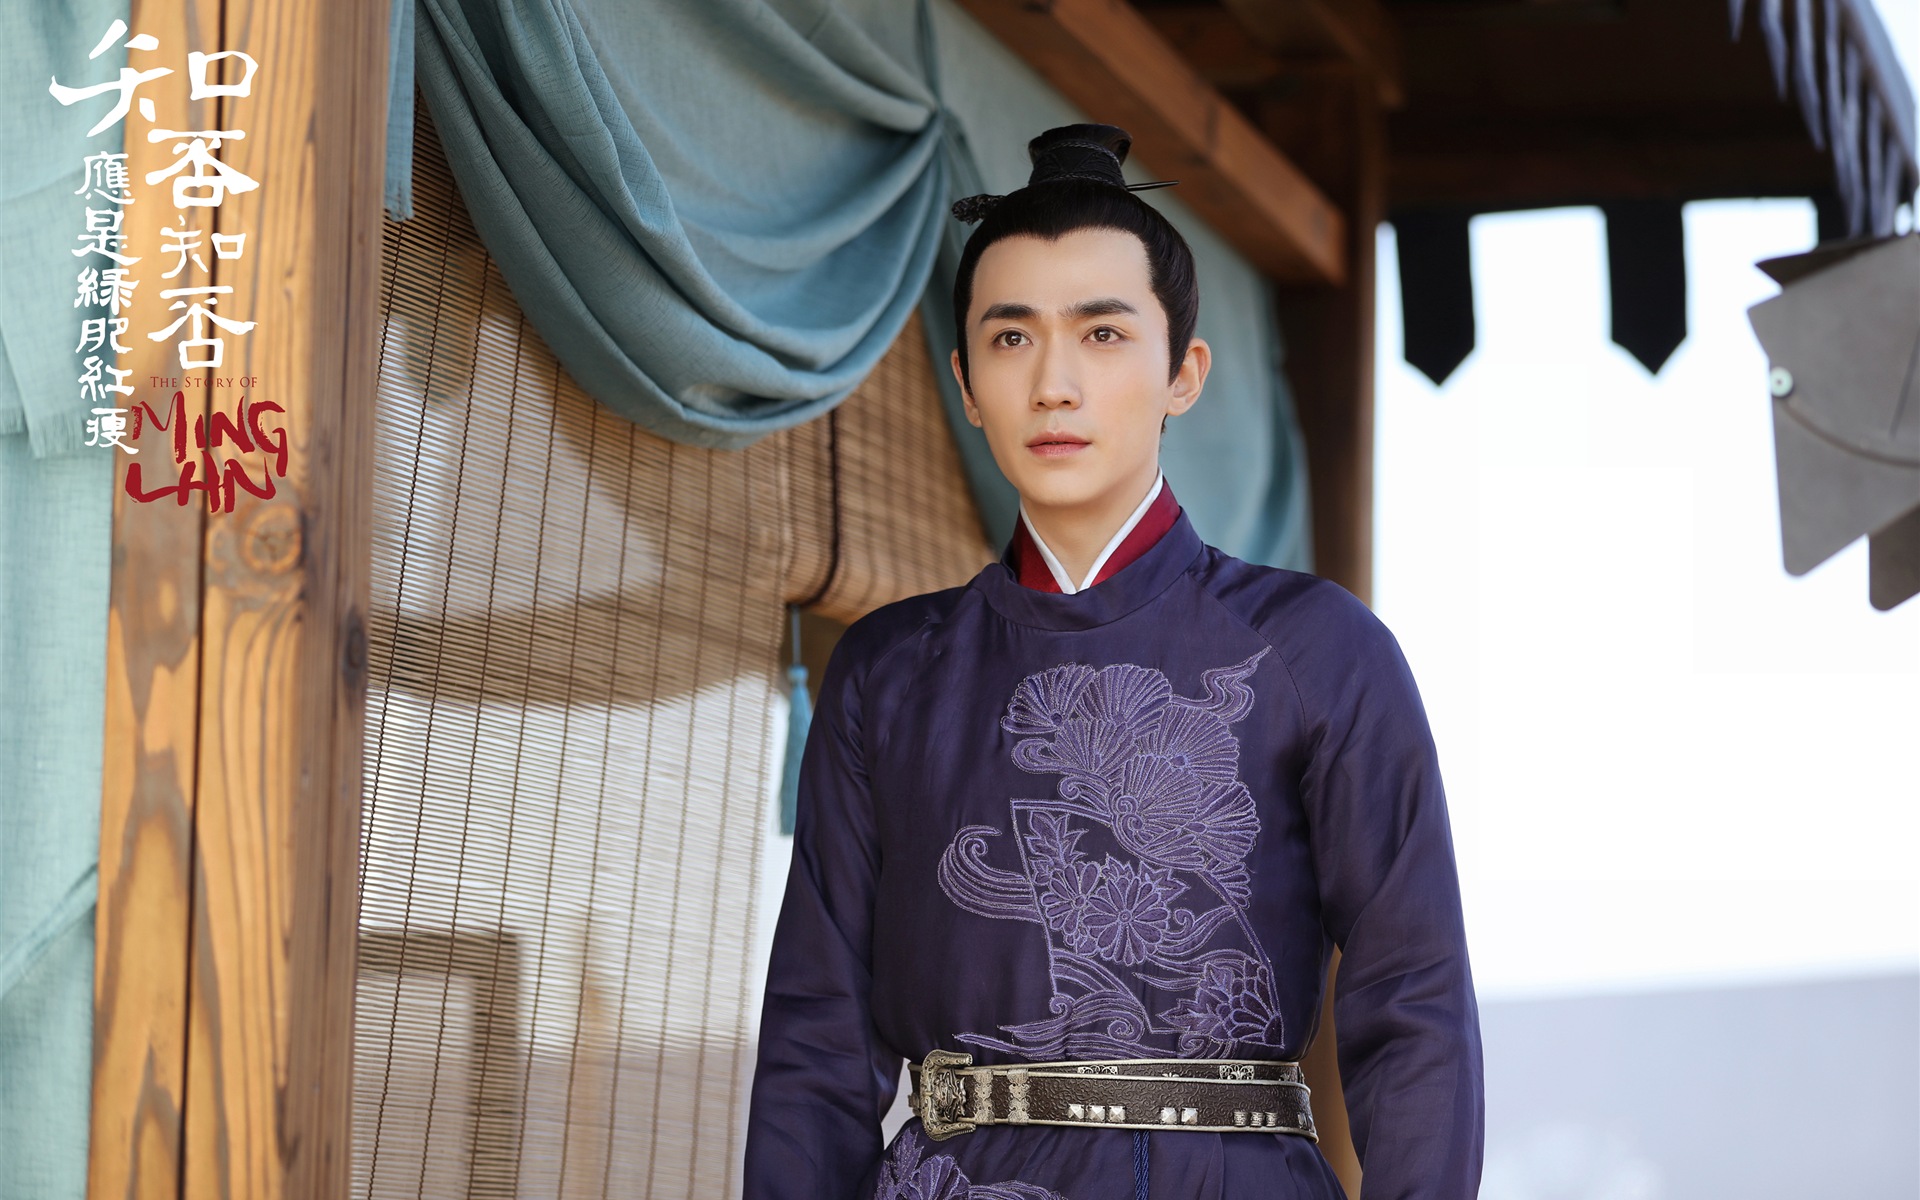 The Story Of MingLan, TV series HD wallpapers #24 - 1920x1200